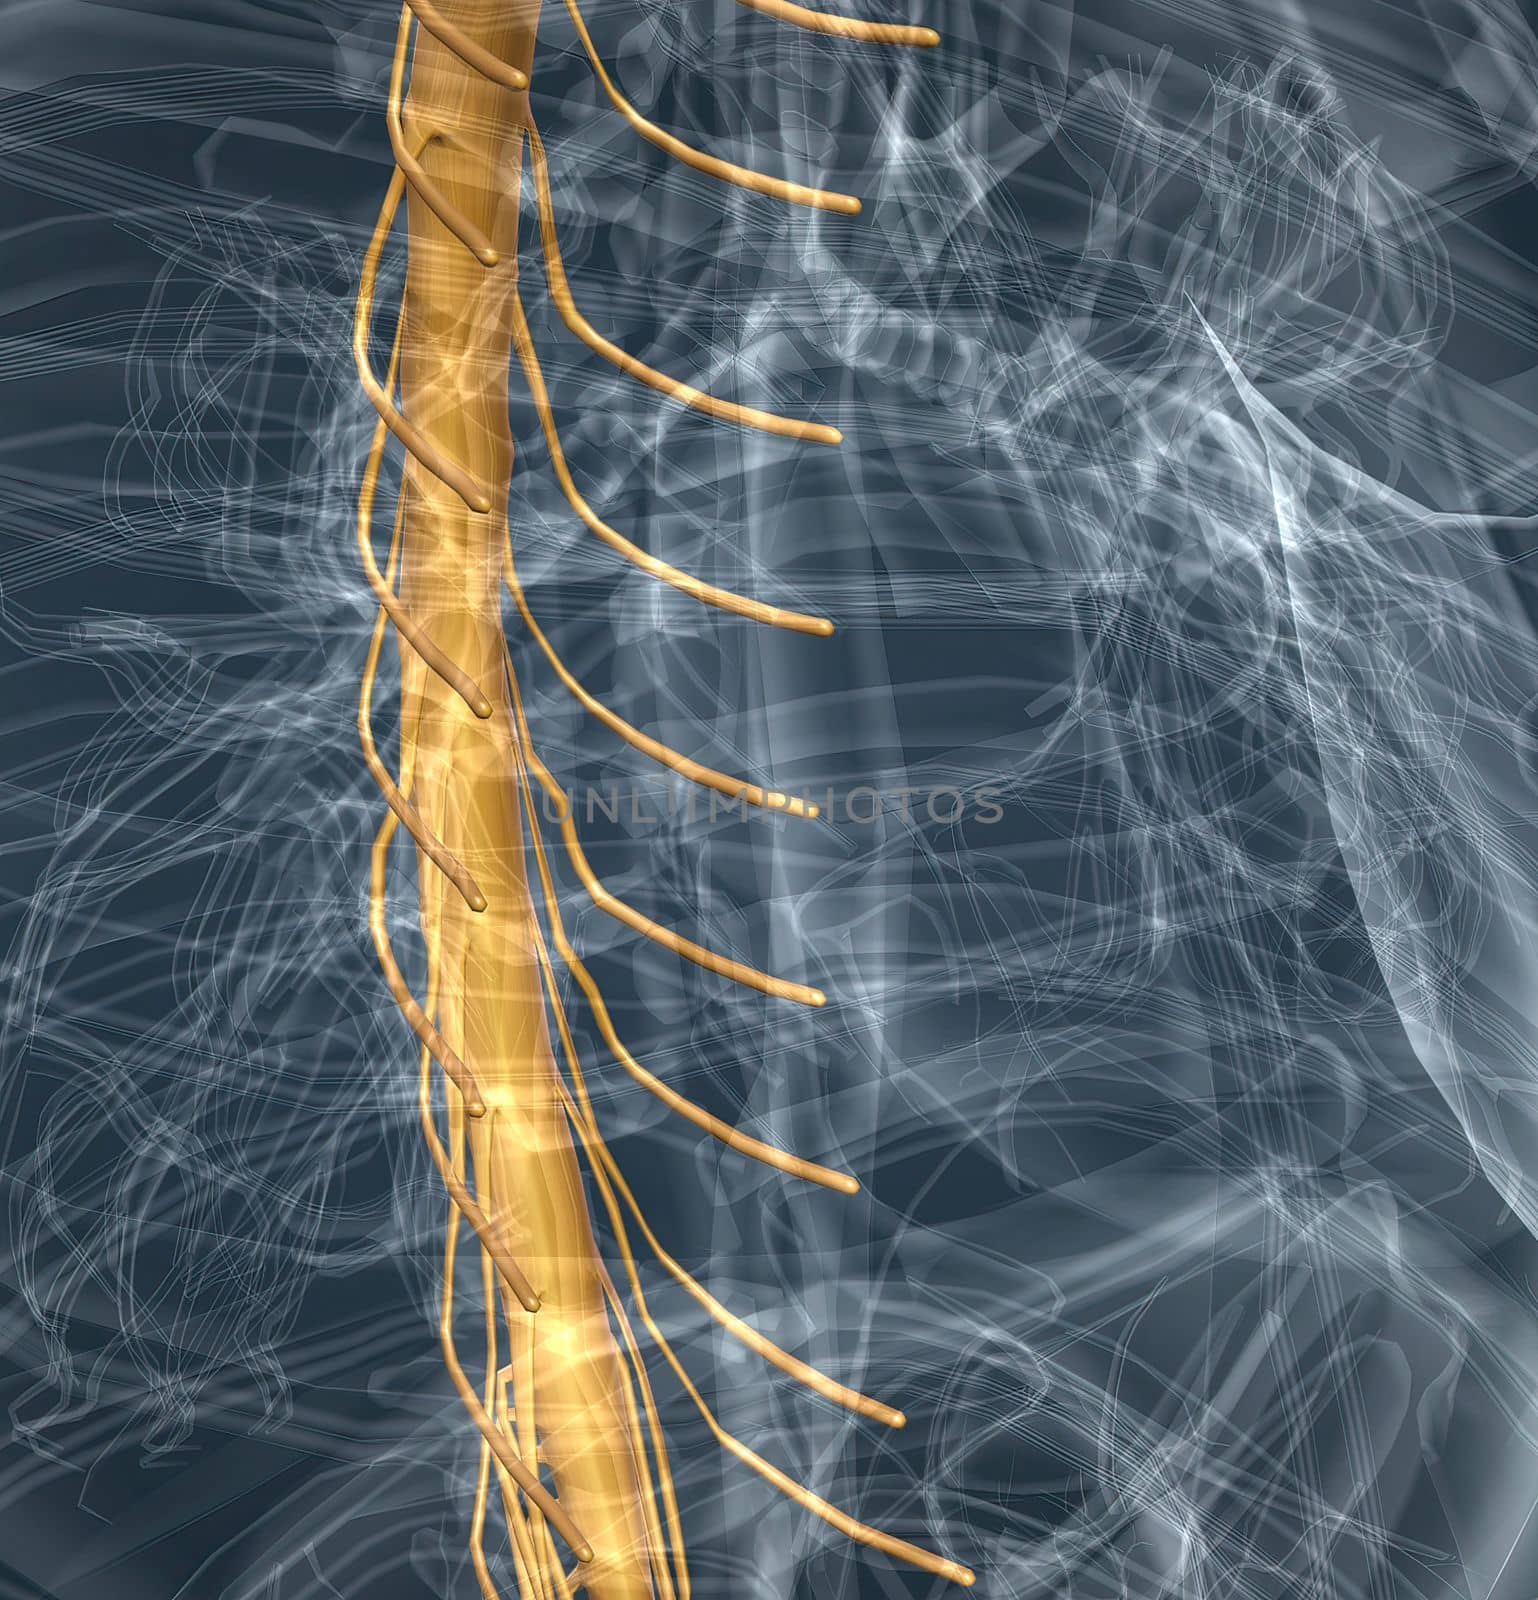 Spinal nerves are grouped into the corresponding cervical, thoracic, lumbar, sacral, and coccygeal regions of the spine. 3d illustration